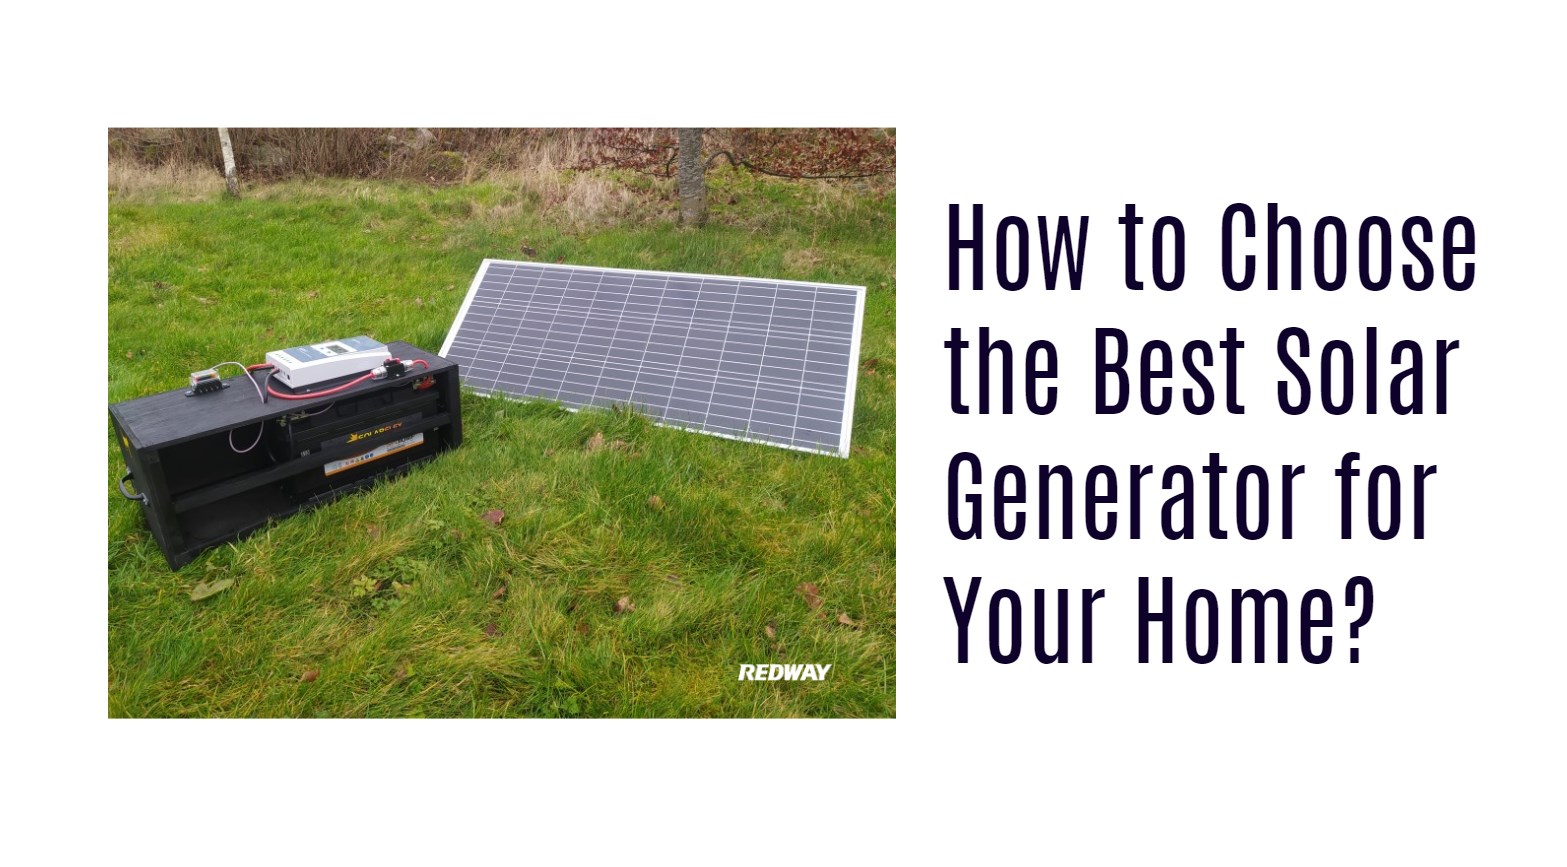 How to Choose the Best Solar Generator for Your Home?